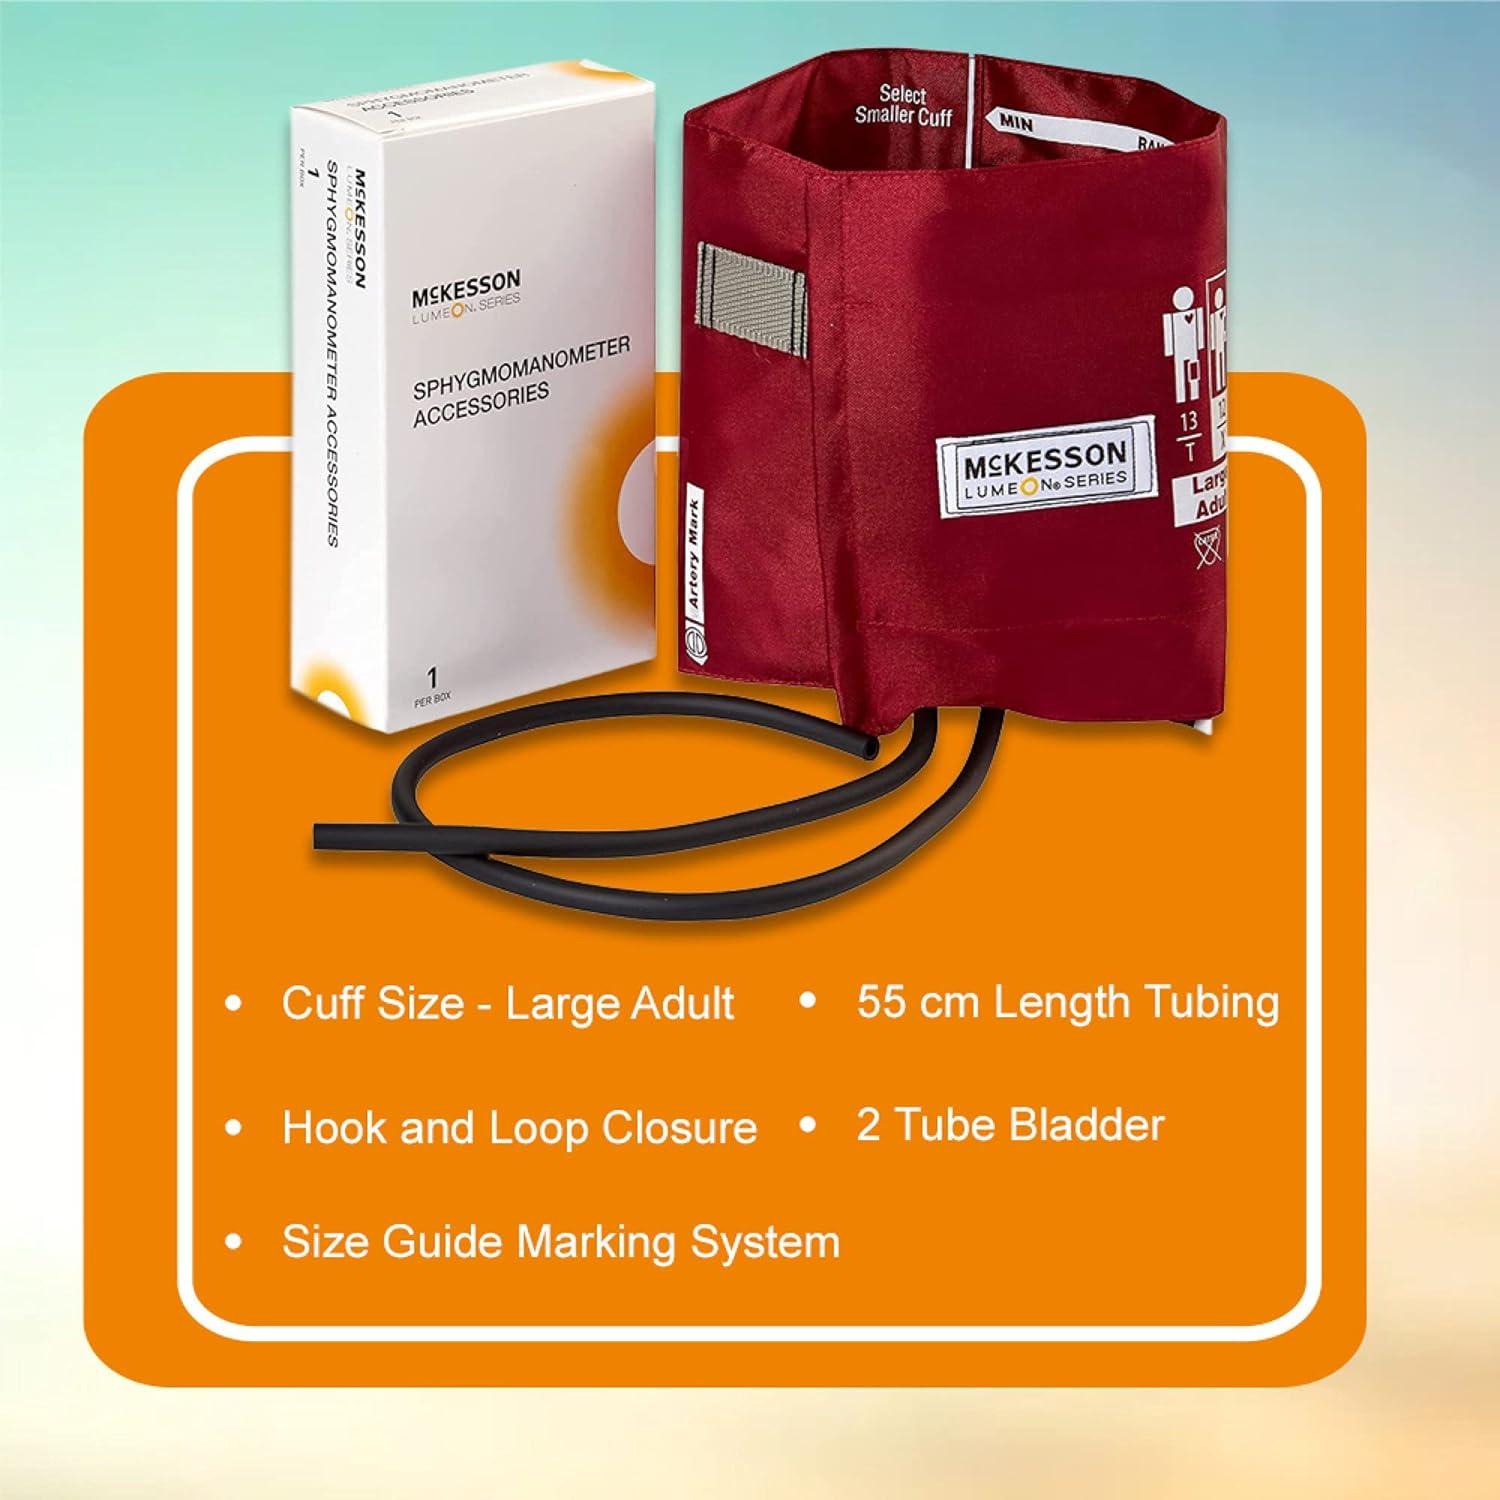 Reusable Blood Pressure Cuff and Two-Tube Bladder